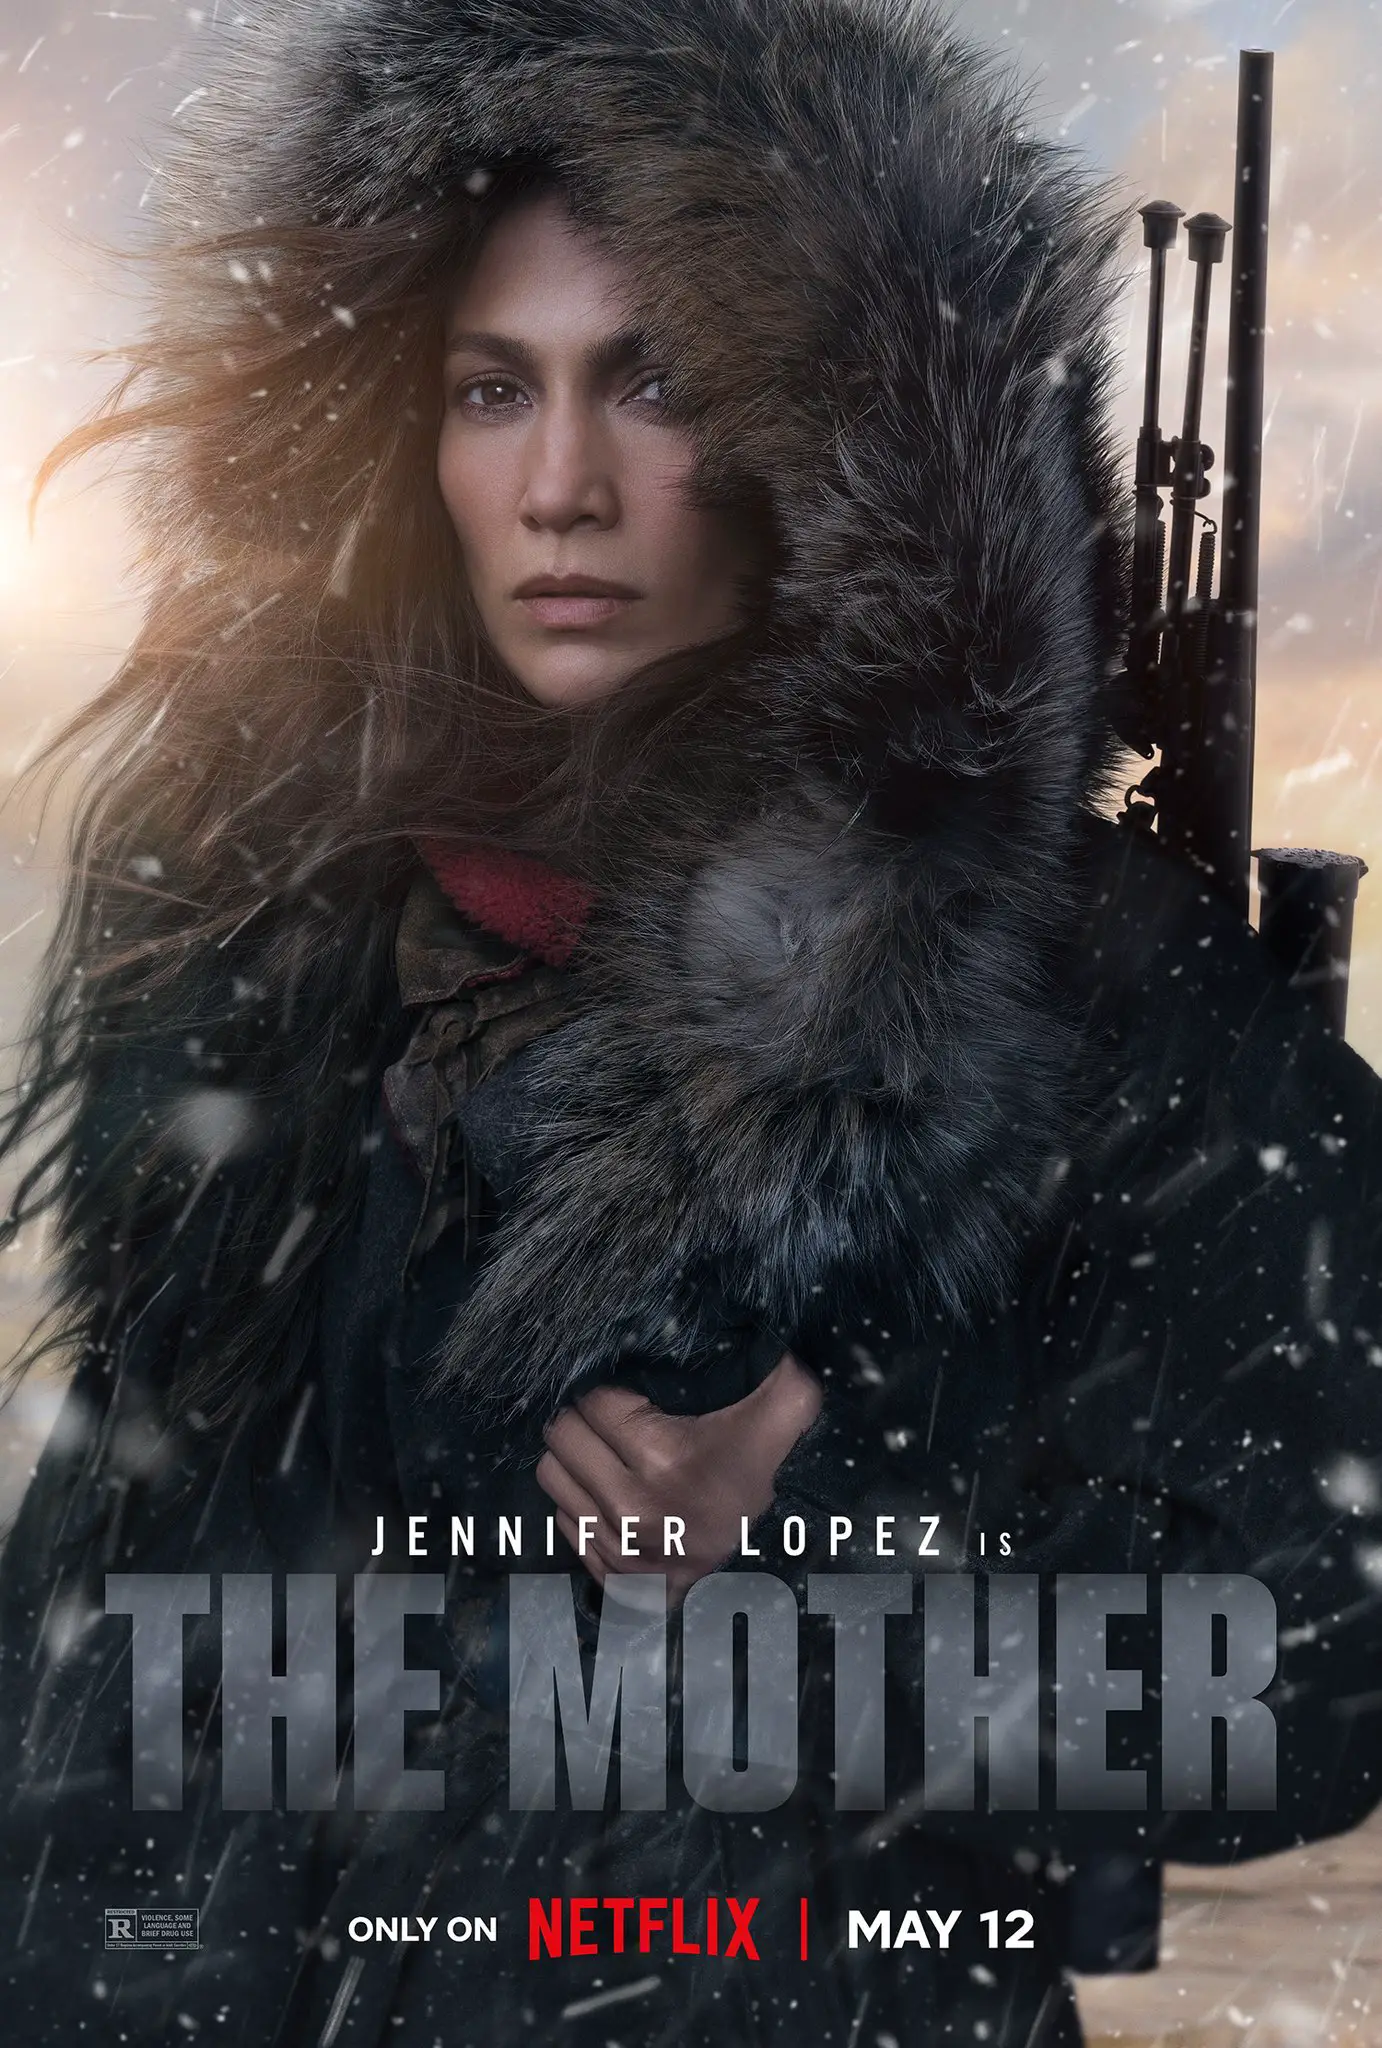 The Mother Poster featuring jennifer lopez